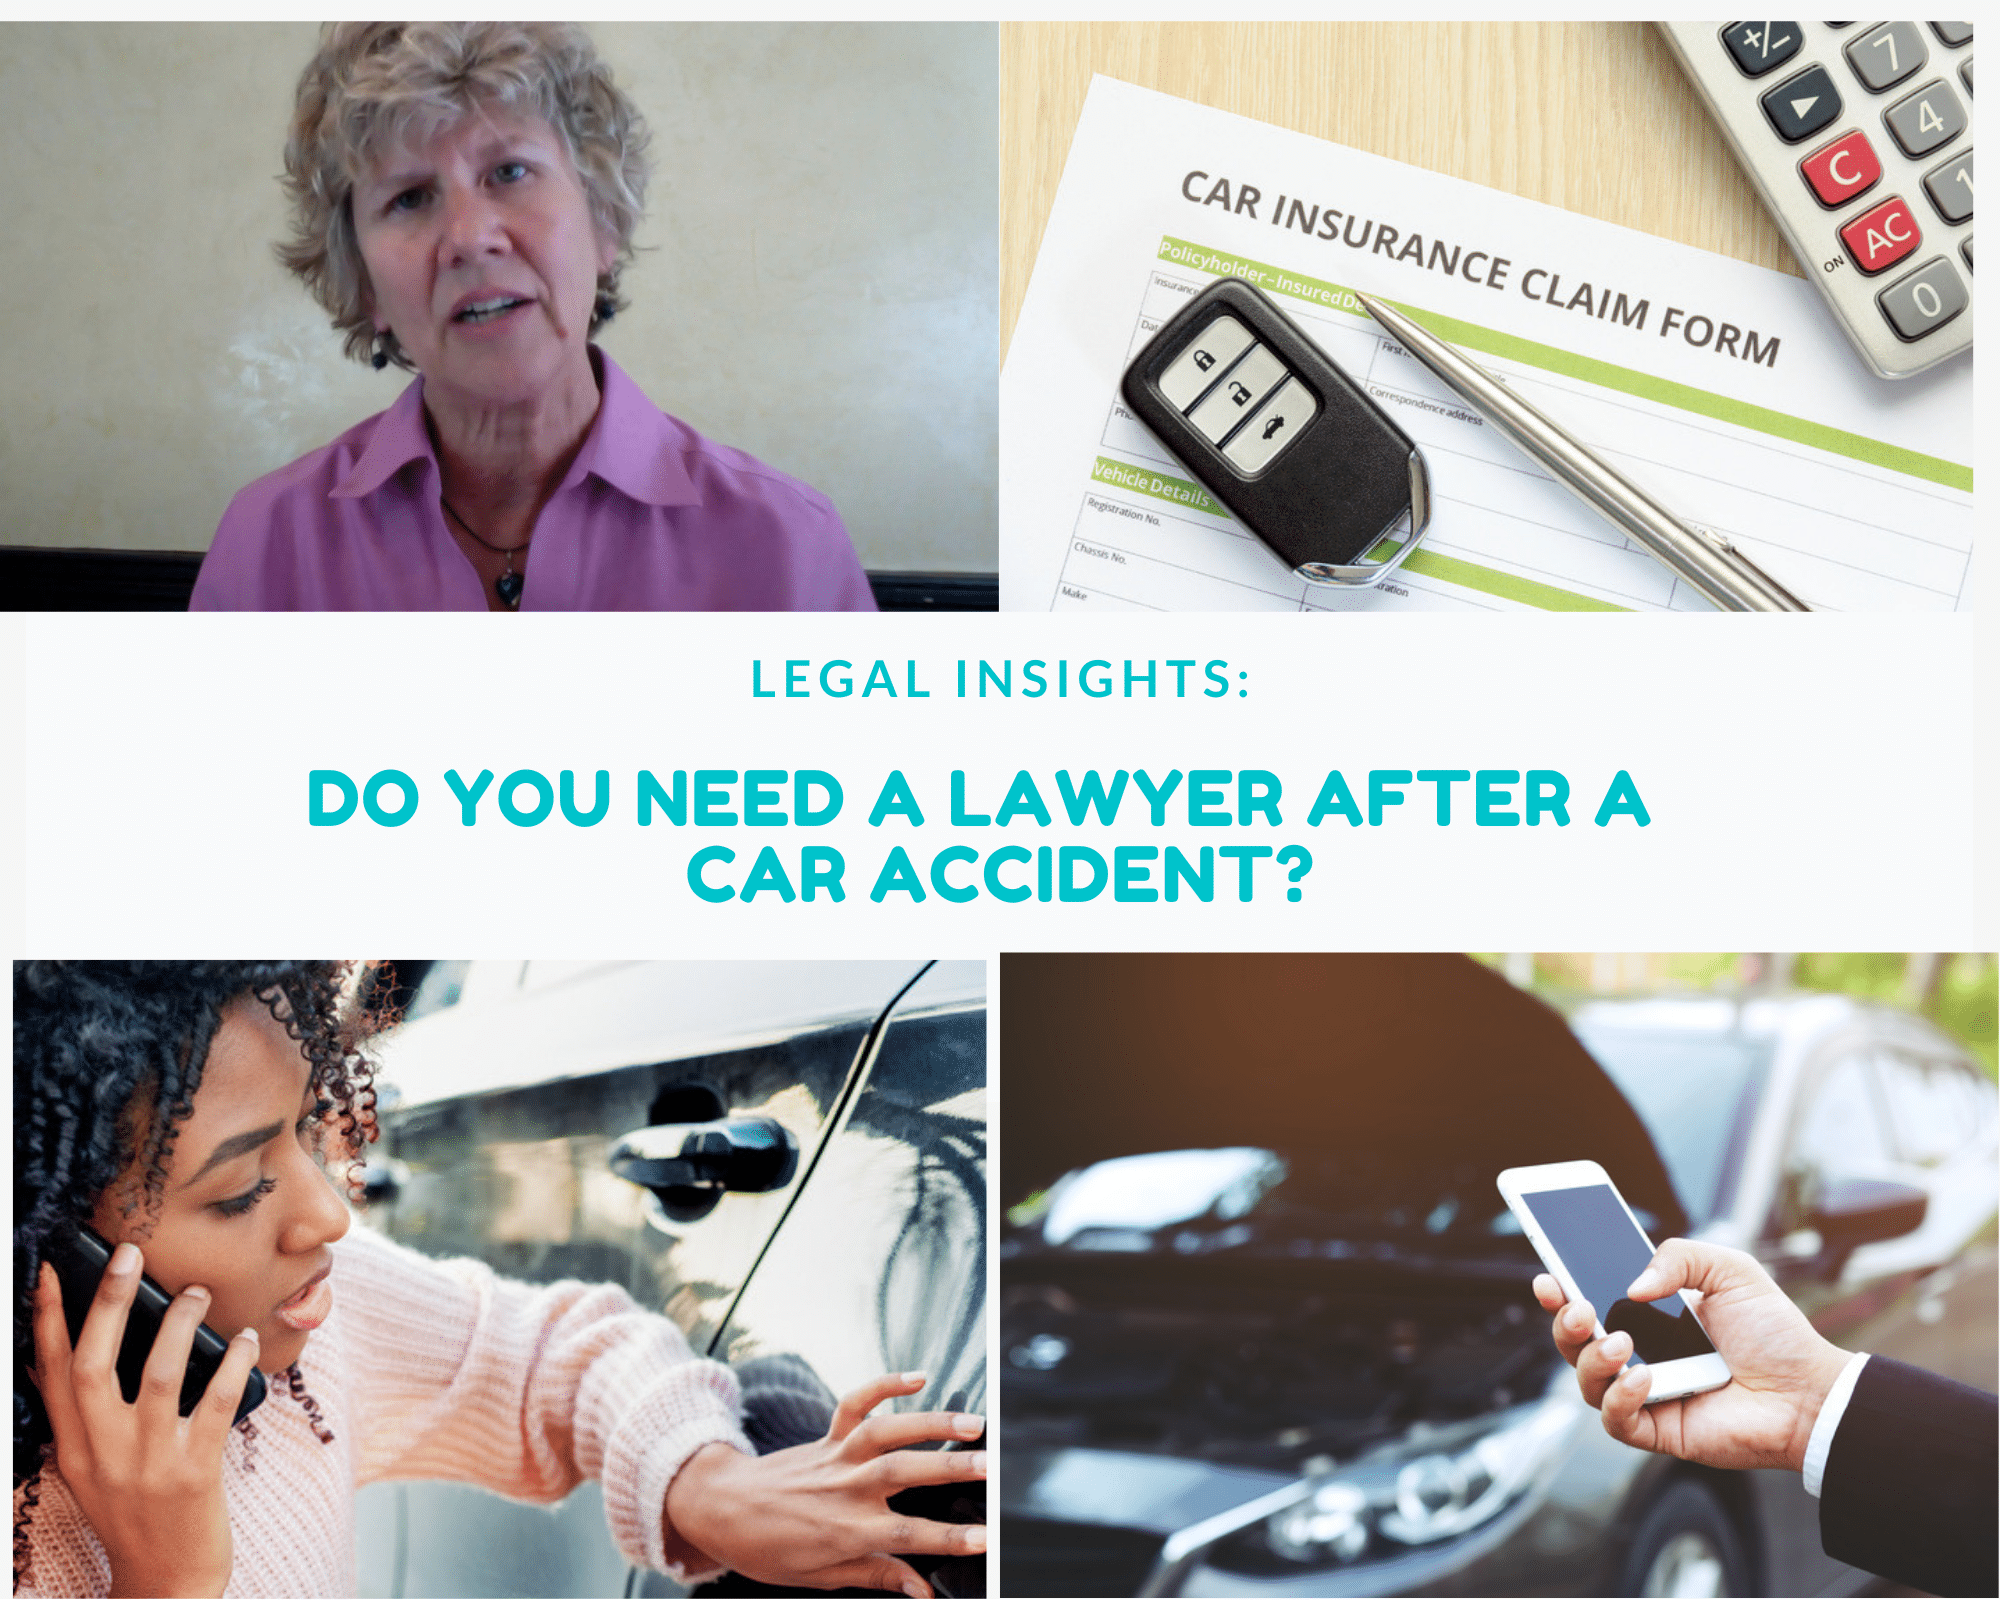 Do You Need a Lawyer after a Car Crash?